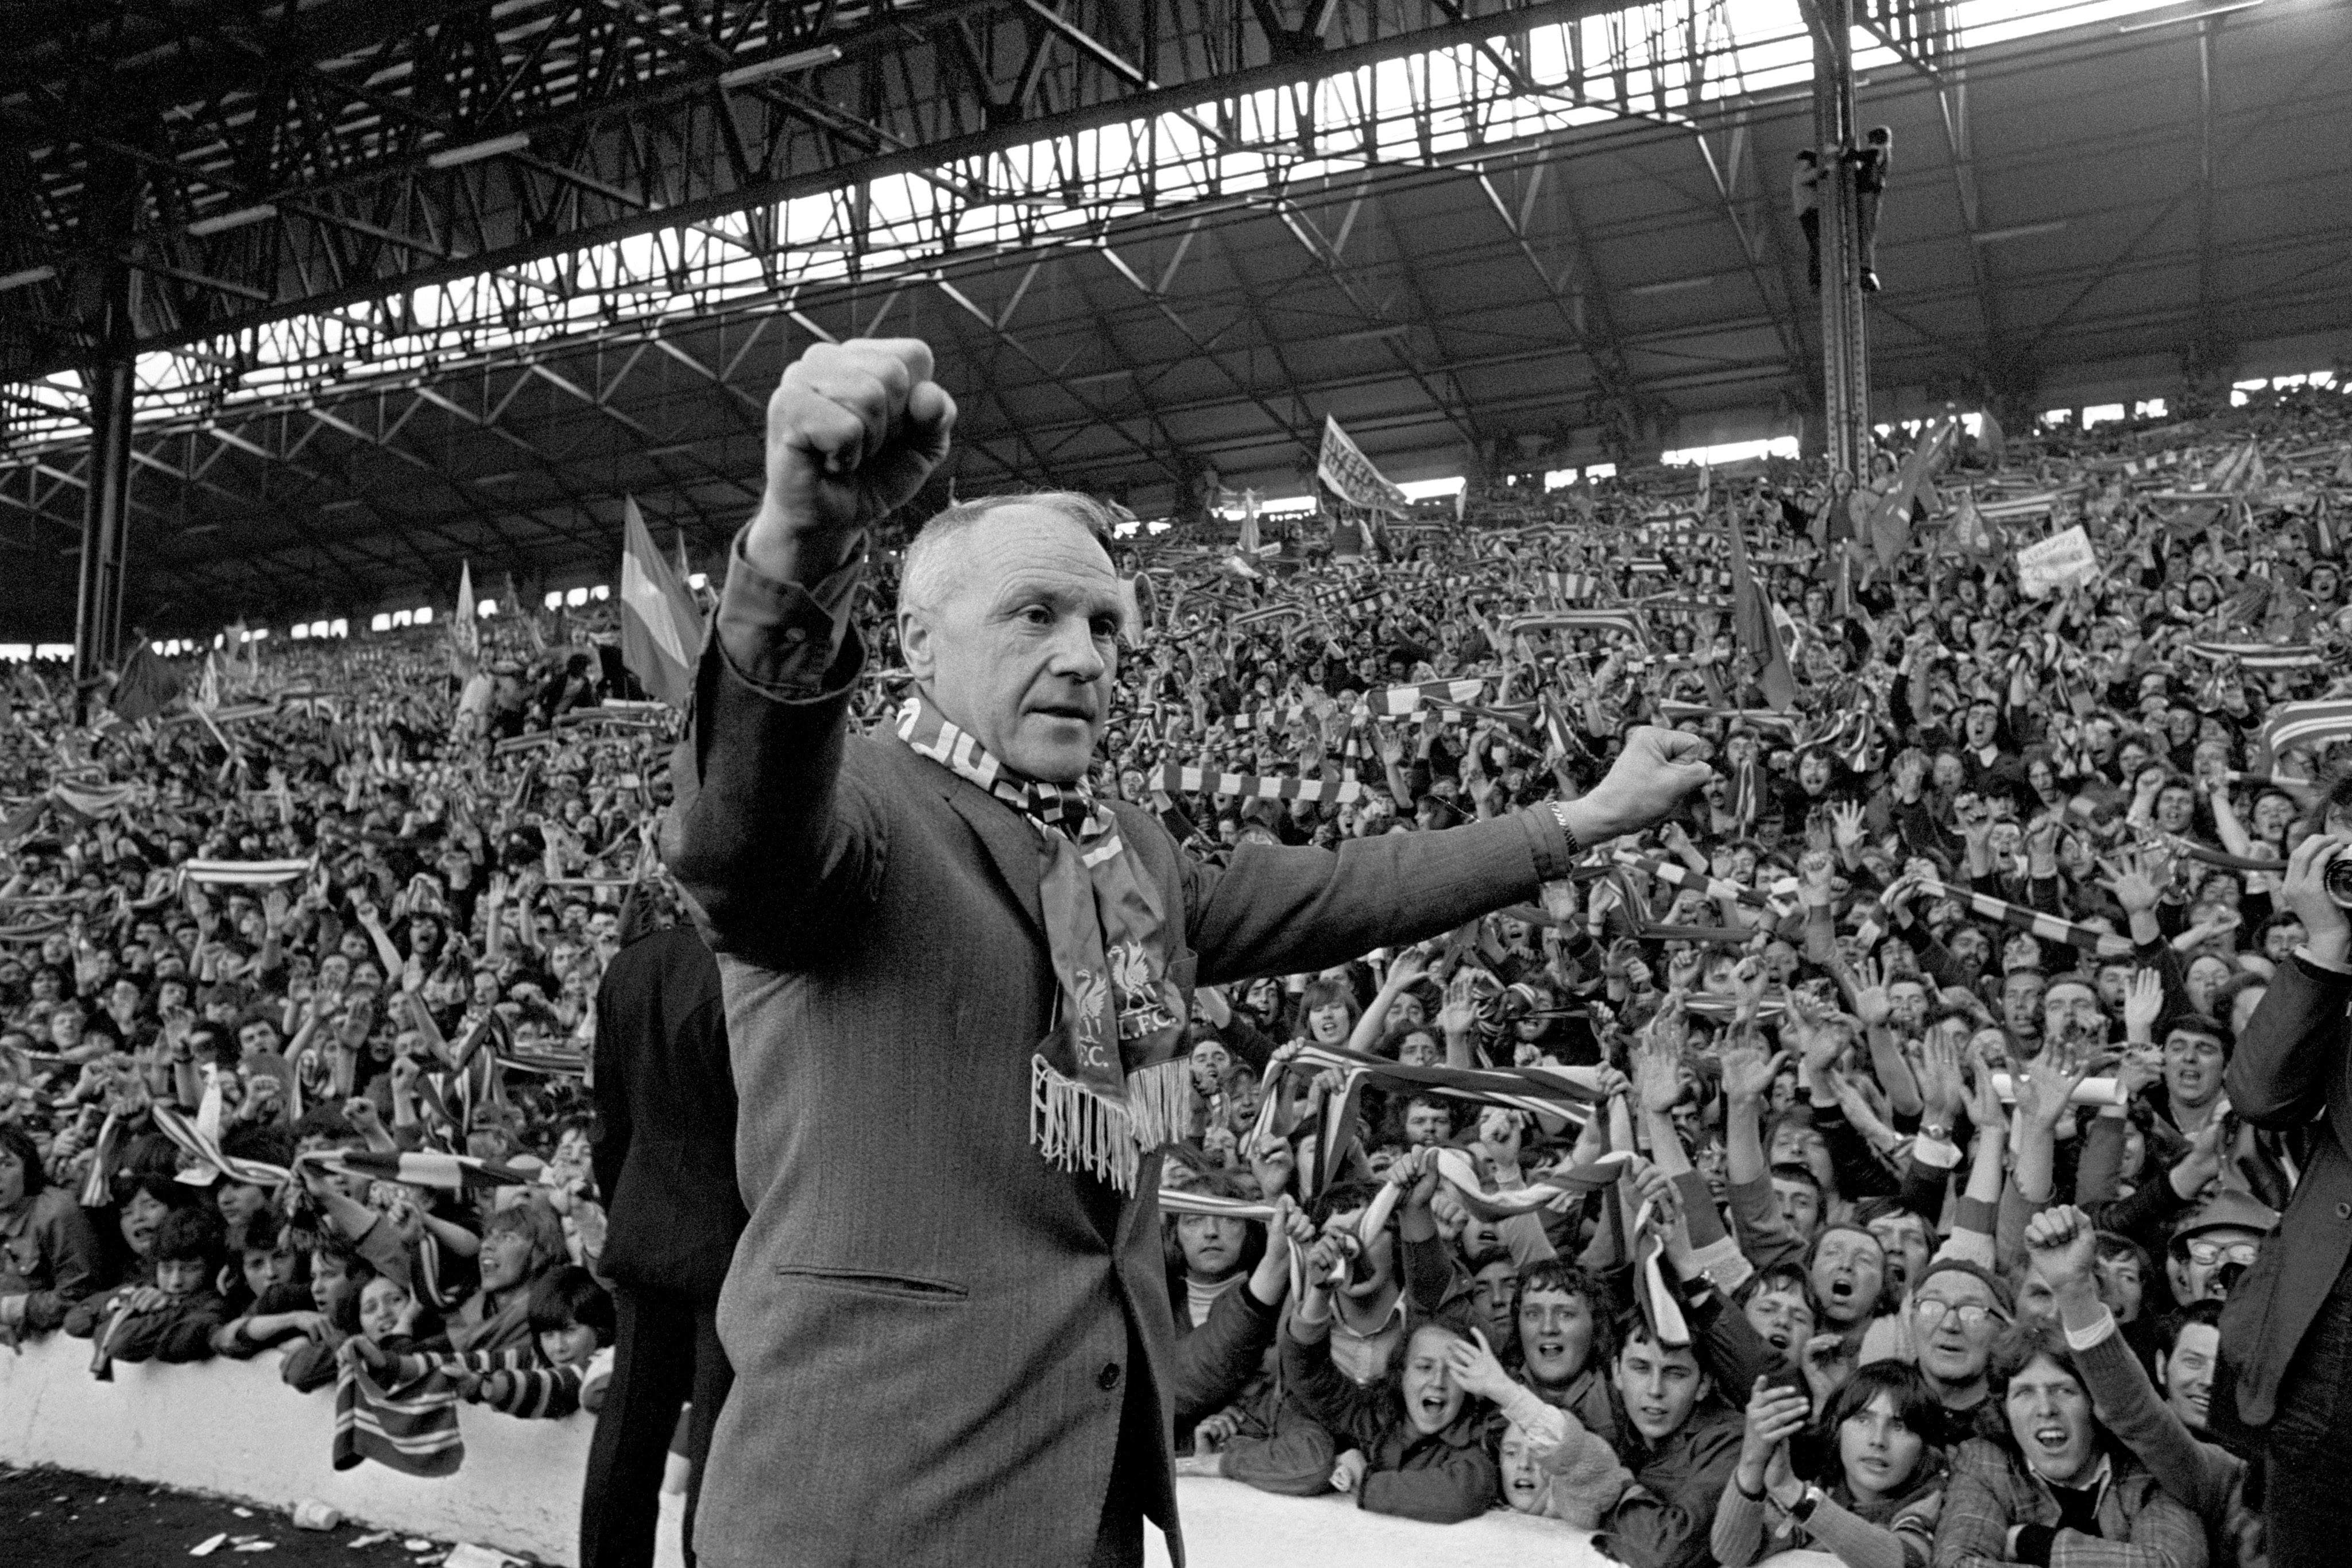 http://flashbak.com/wp-content/uploads/2014/09/Turning-towards-the-Kop-end-of-Anfield-Shankly-gets-an-ovation-from-the-fans-who-idolised-him-when-Liverpool-became-League-champions-2741973-PA-1229338-2.jpg